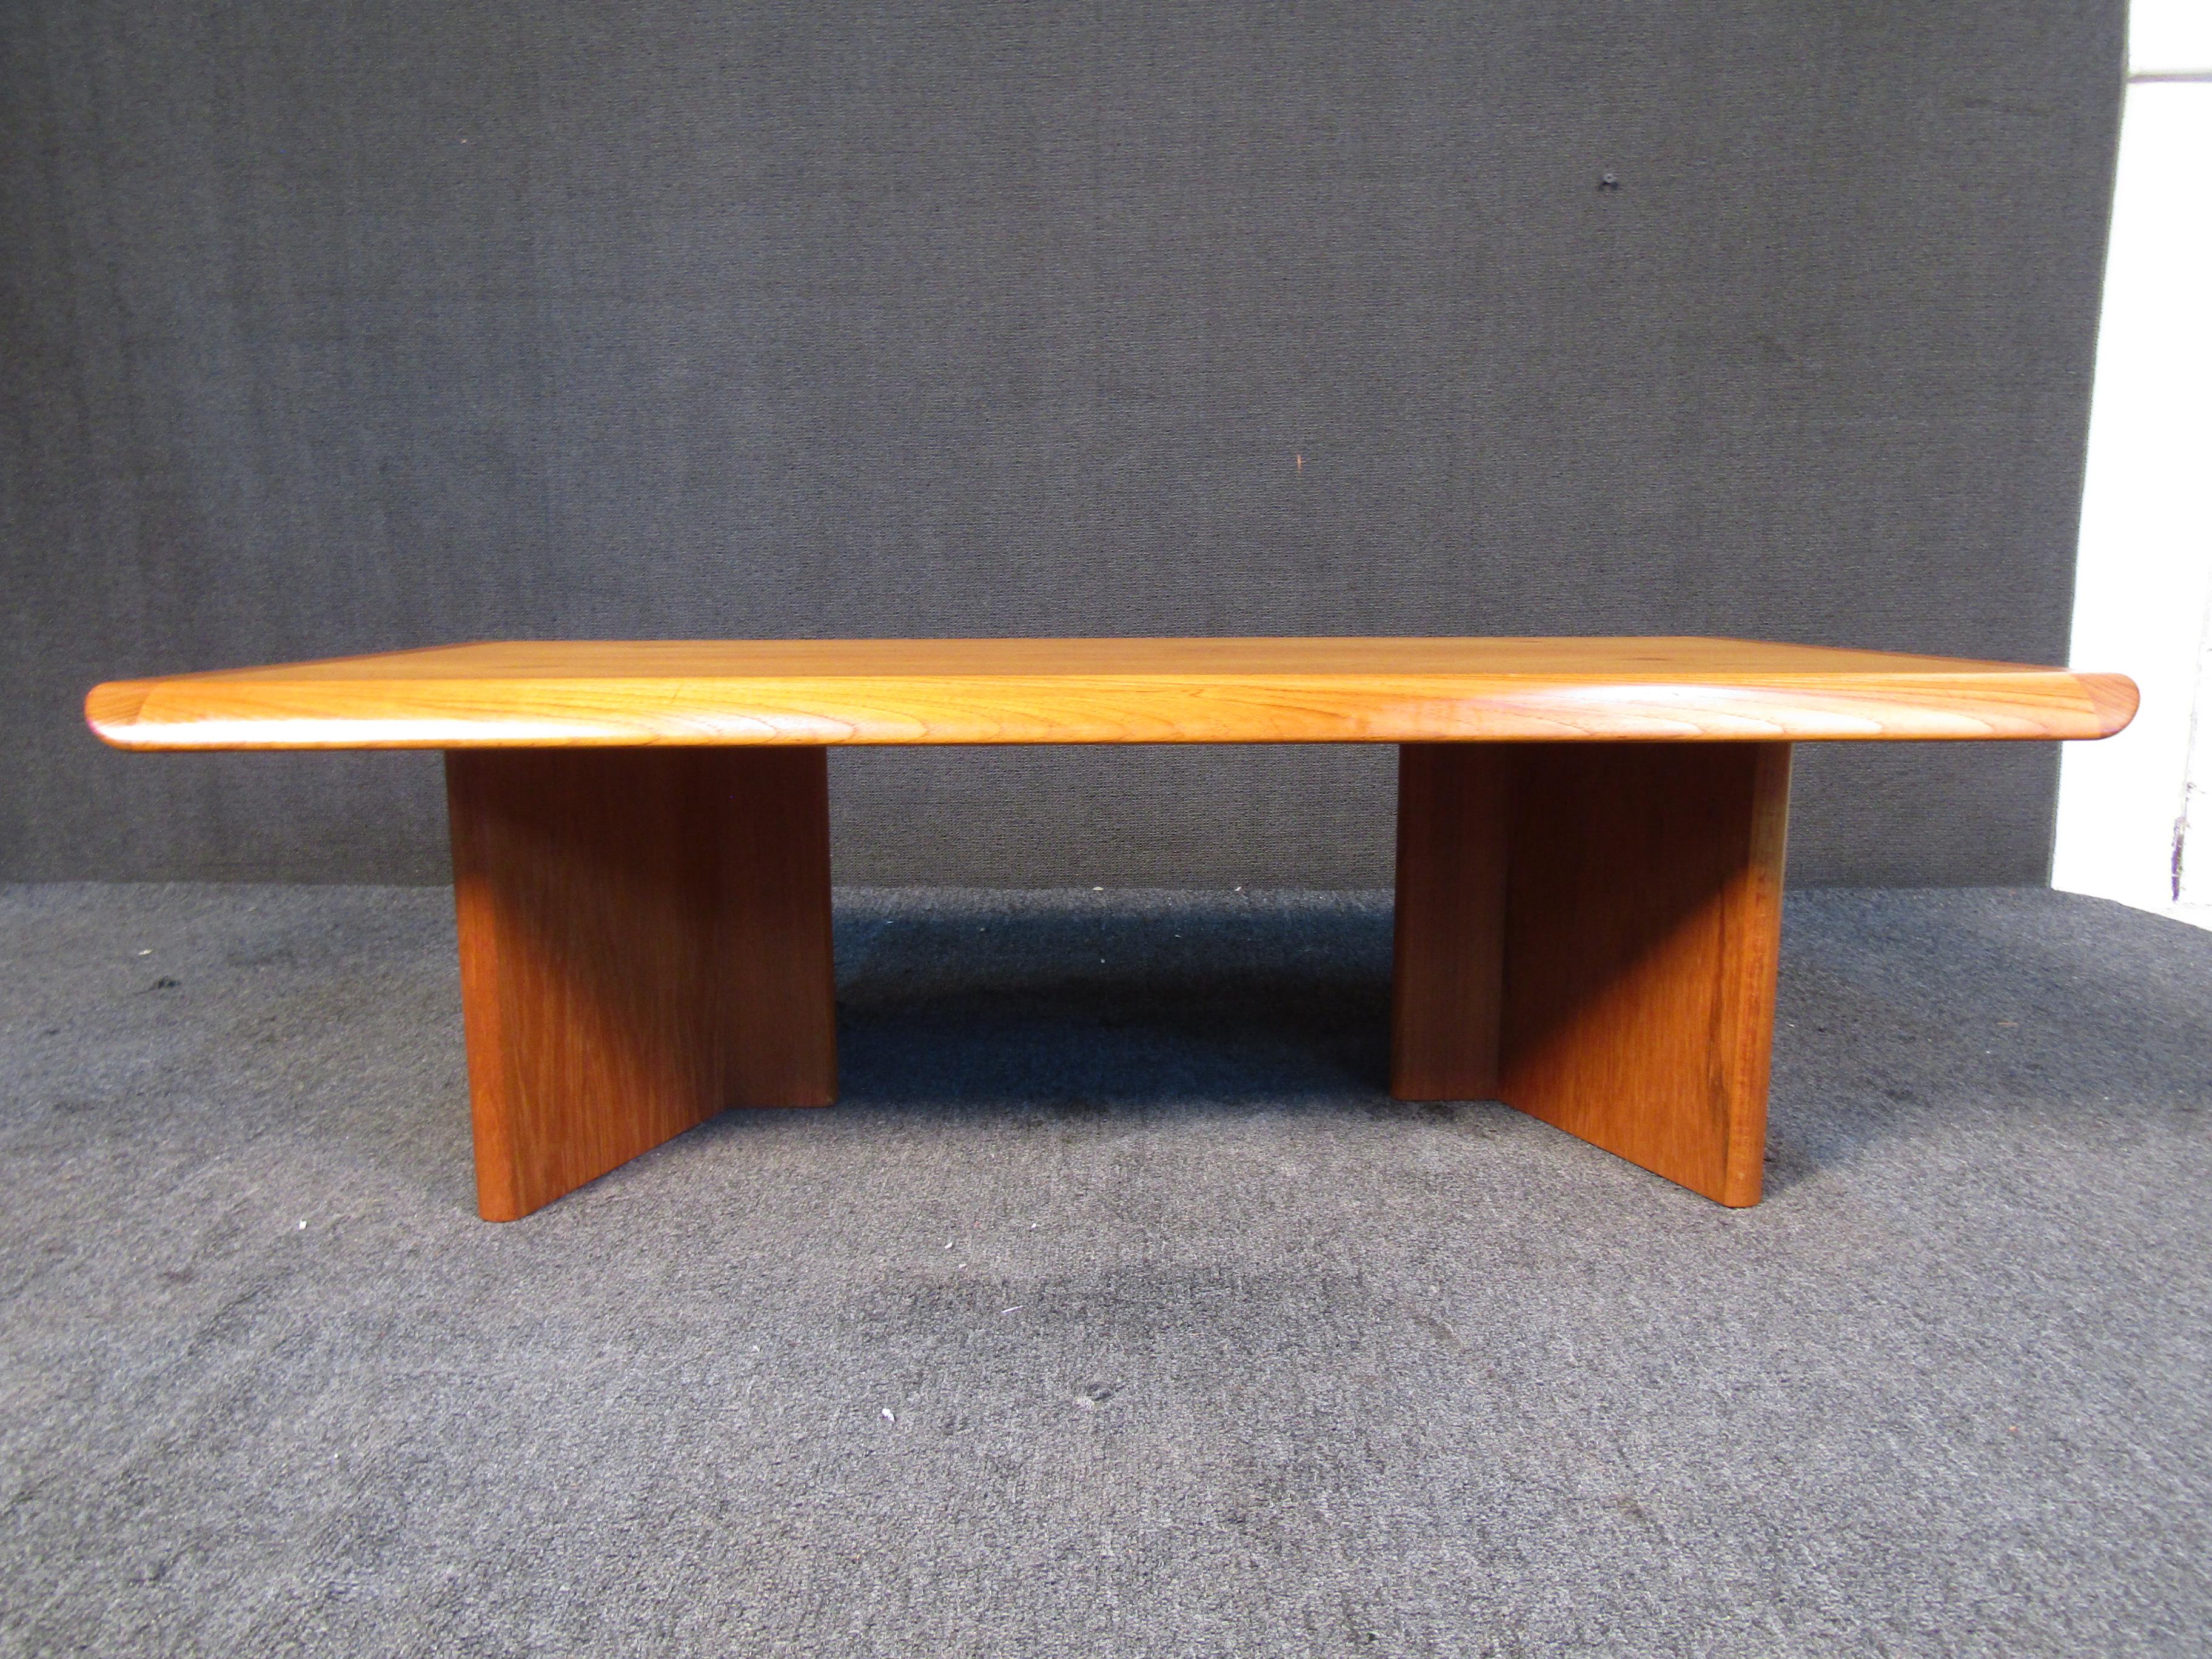 This vintage coffee table combines a large solid top with a unique geometric base. Made with Mid-Century craftsmanship by Nordic Furniture. Please confirm item location with seller (NY/NJ).